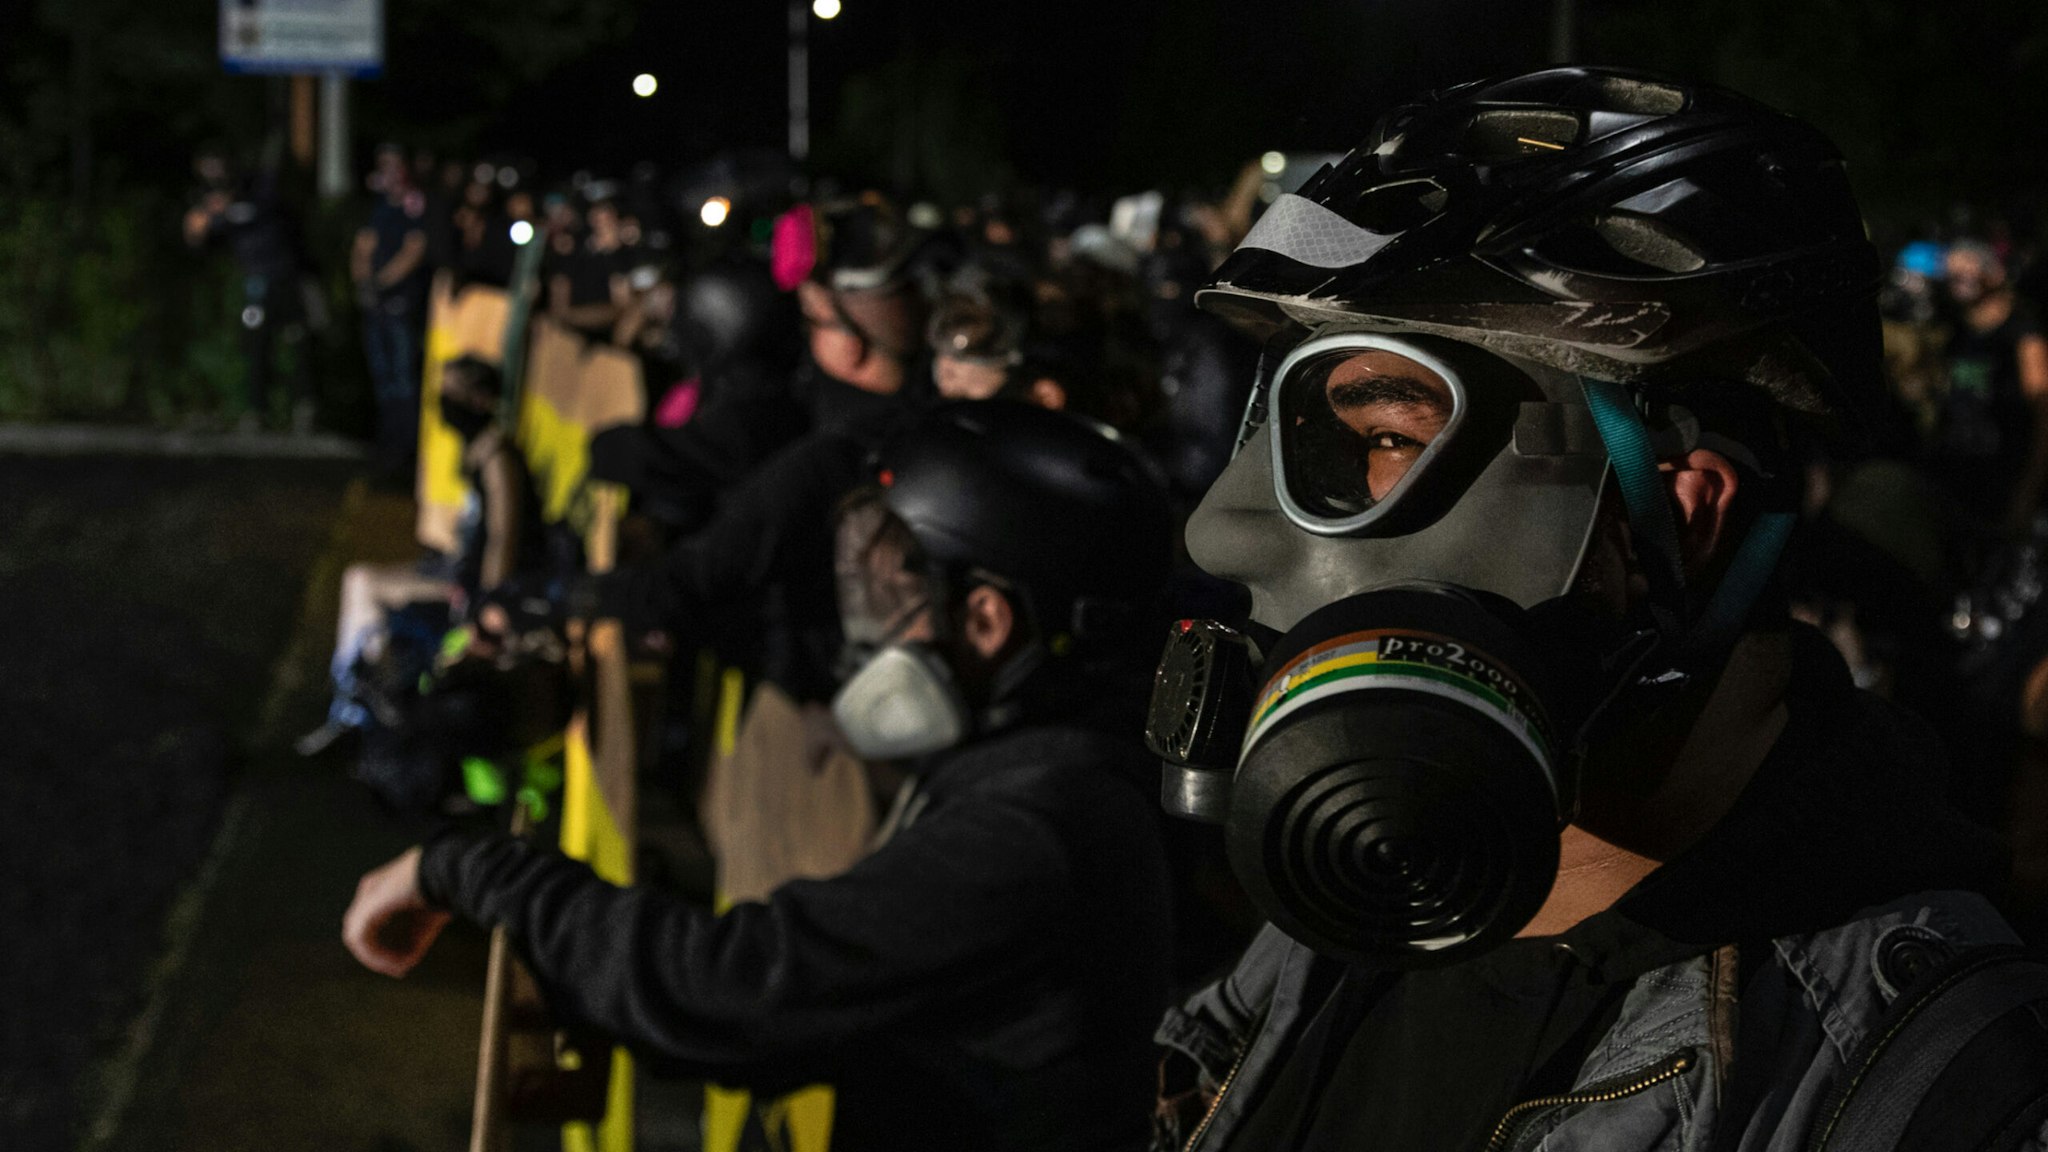 Protesters are seen during a standoff at a Portland police precinct in Portland, Oregon on August 15, 2020.